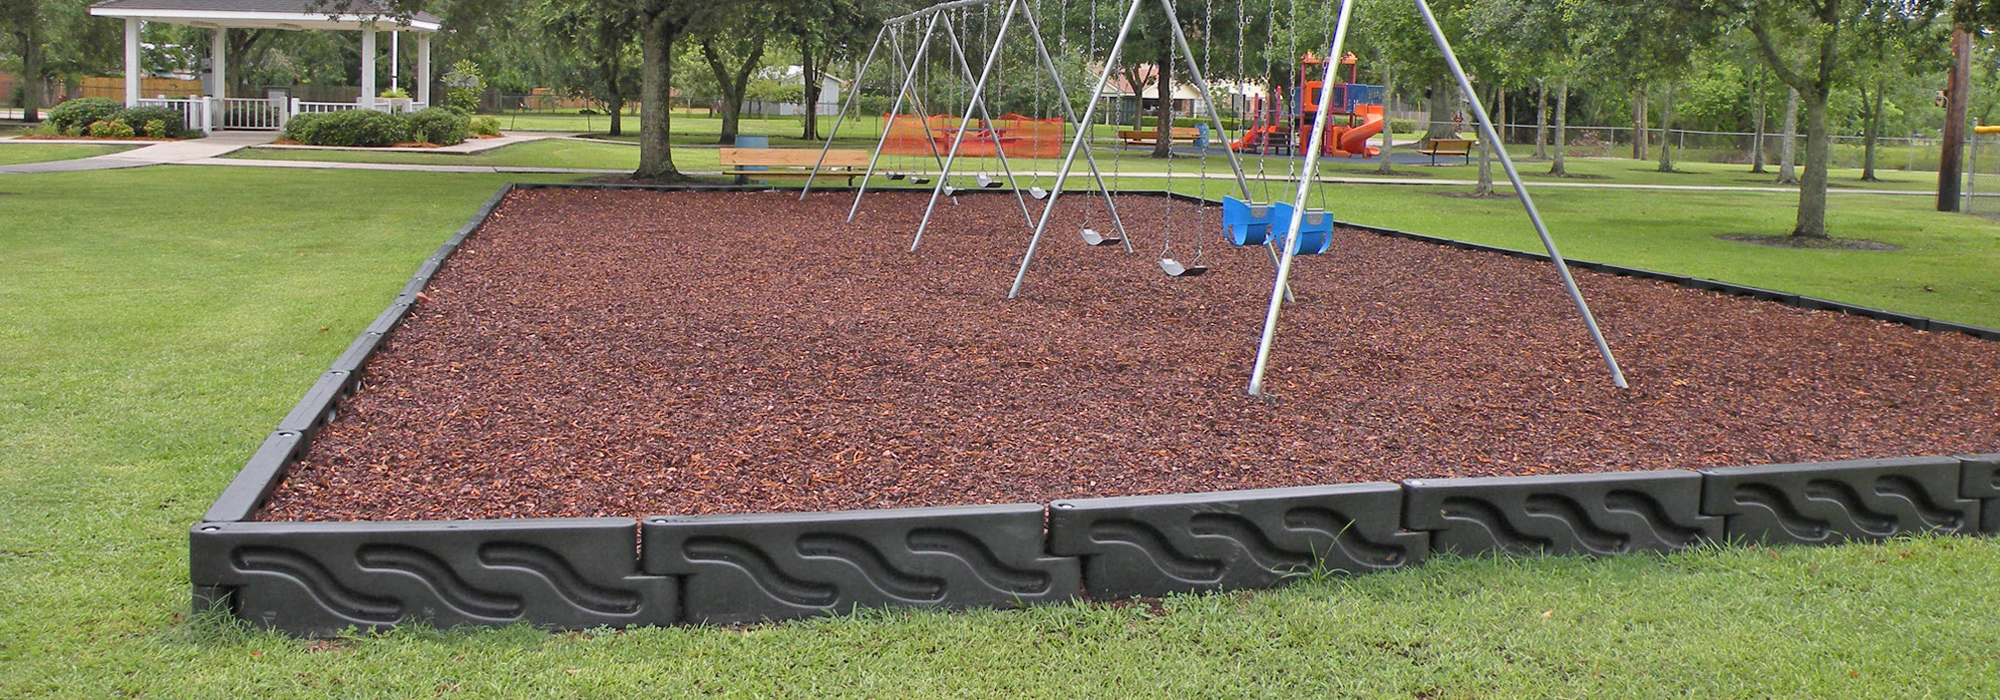 Playground Safety Surfacing Ground, Edging Ideas For Playgrounds